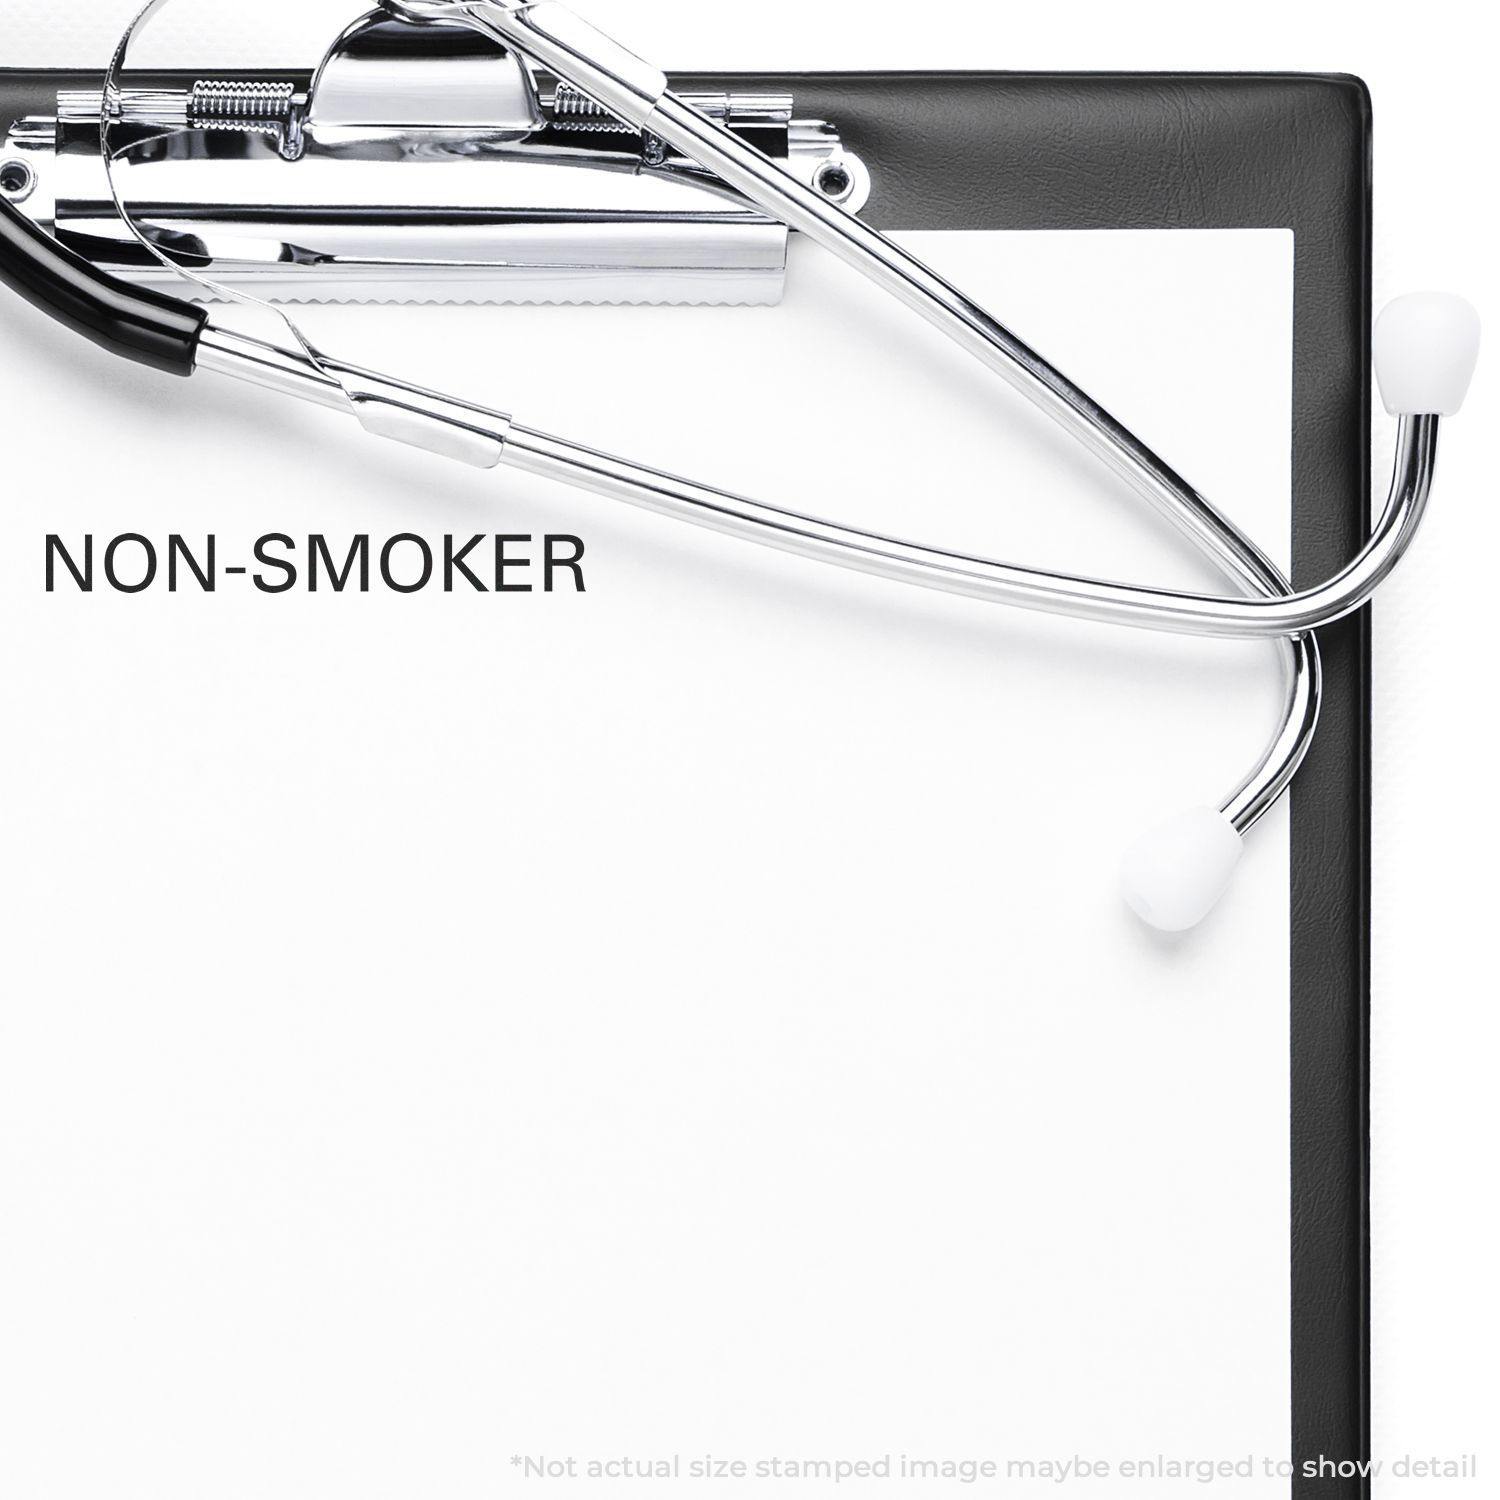 A stock office rubber stamp with a stamped image showing how the text "NON-SMOKER" is displayed after stamping.